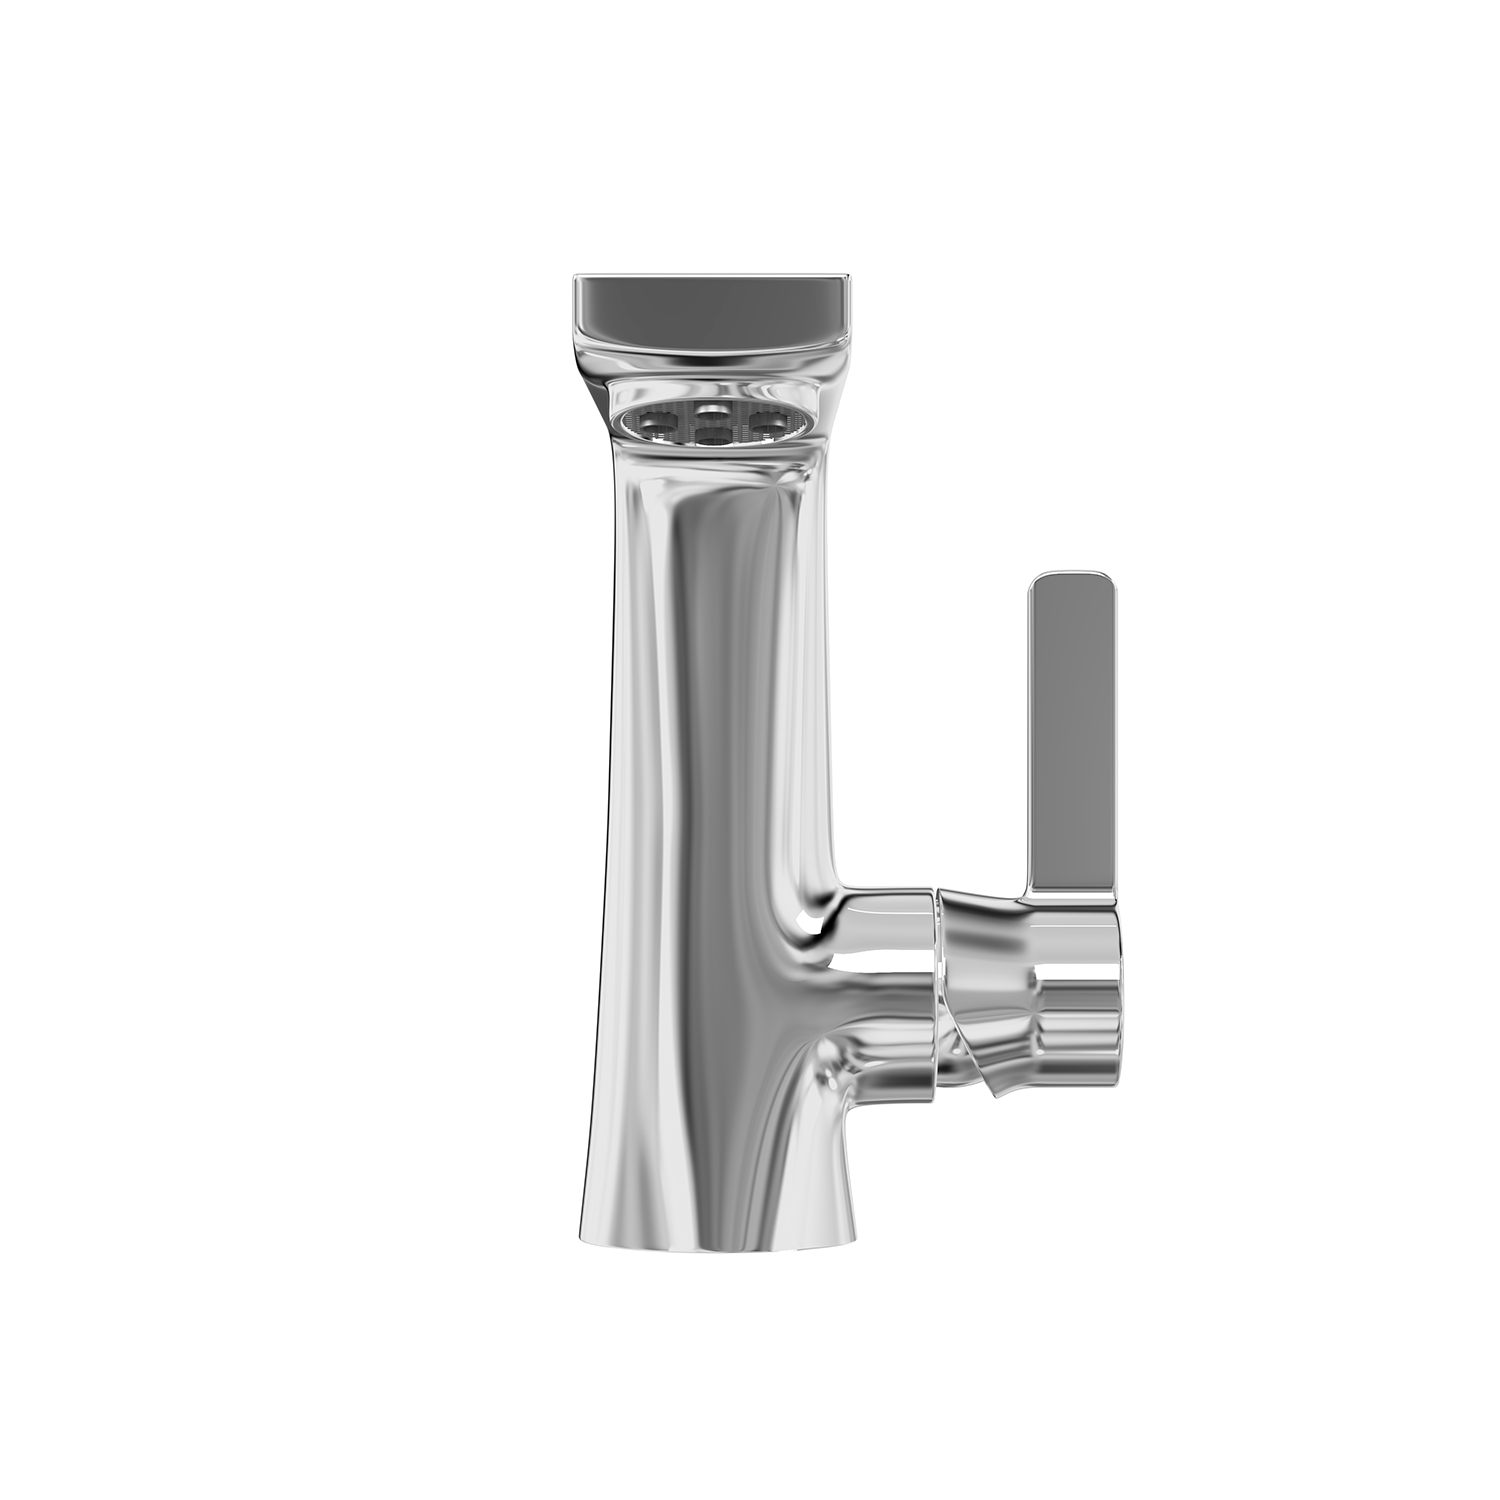 DAX Single Handle Bathroom Faucet, Brass Body, Chrome Finish, Spout Height 4-15/16 Inches (DAX-8226)